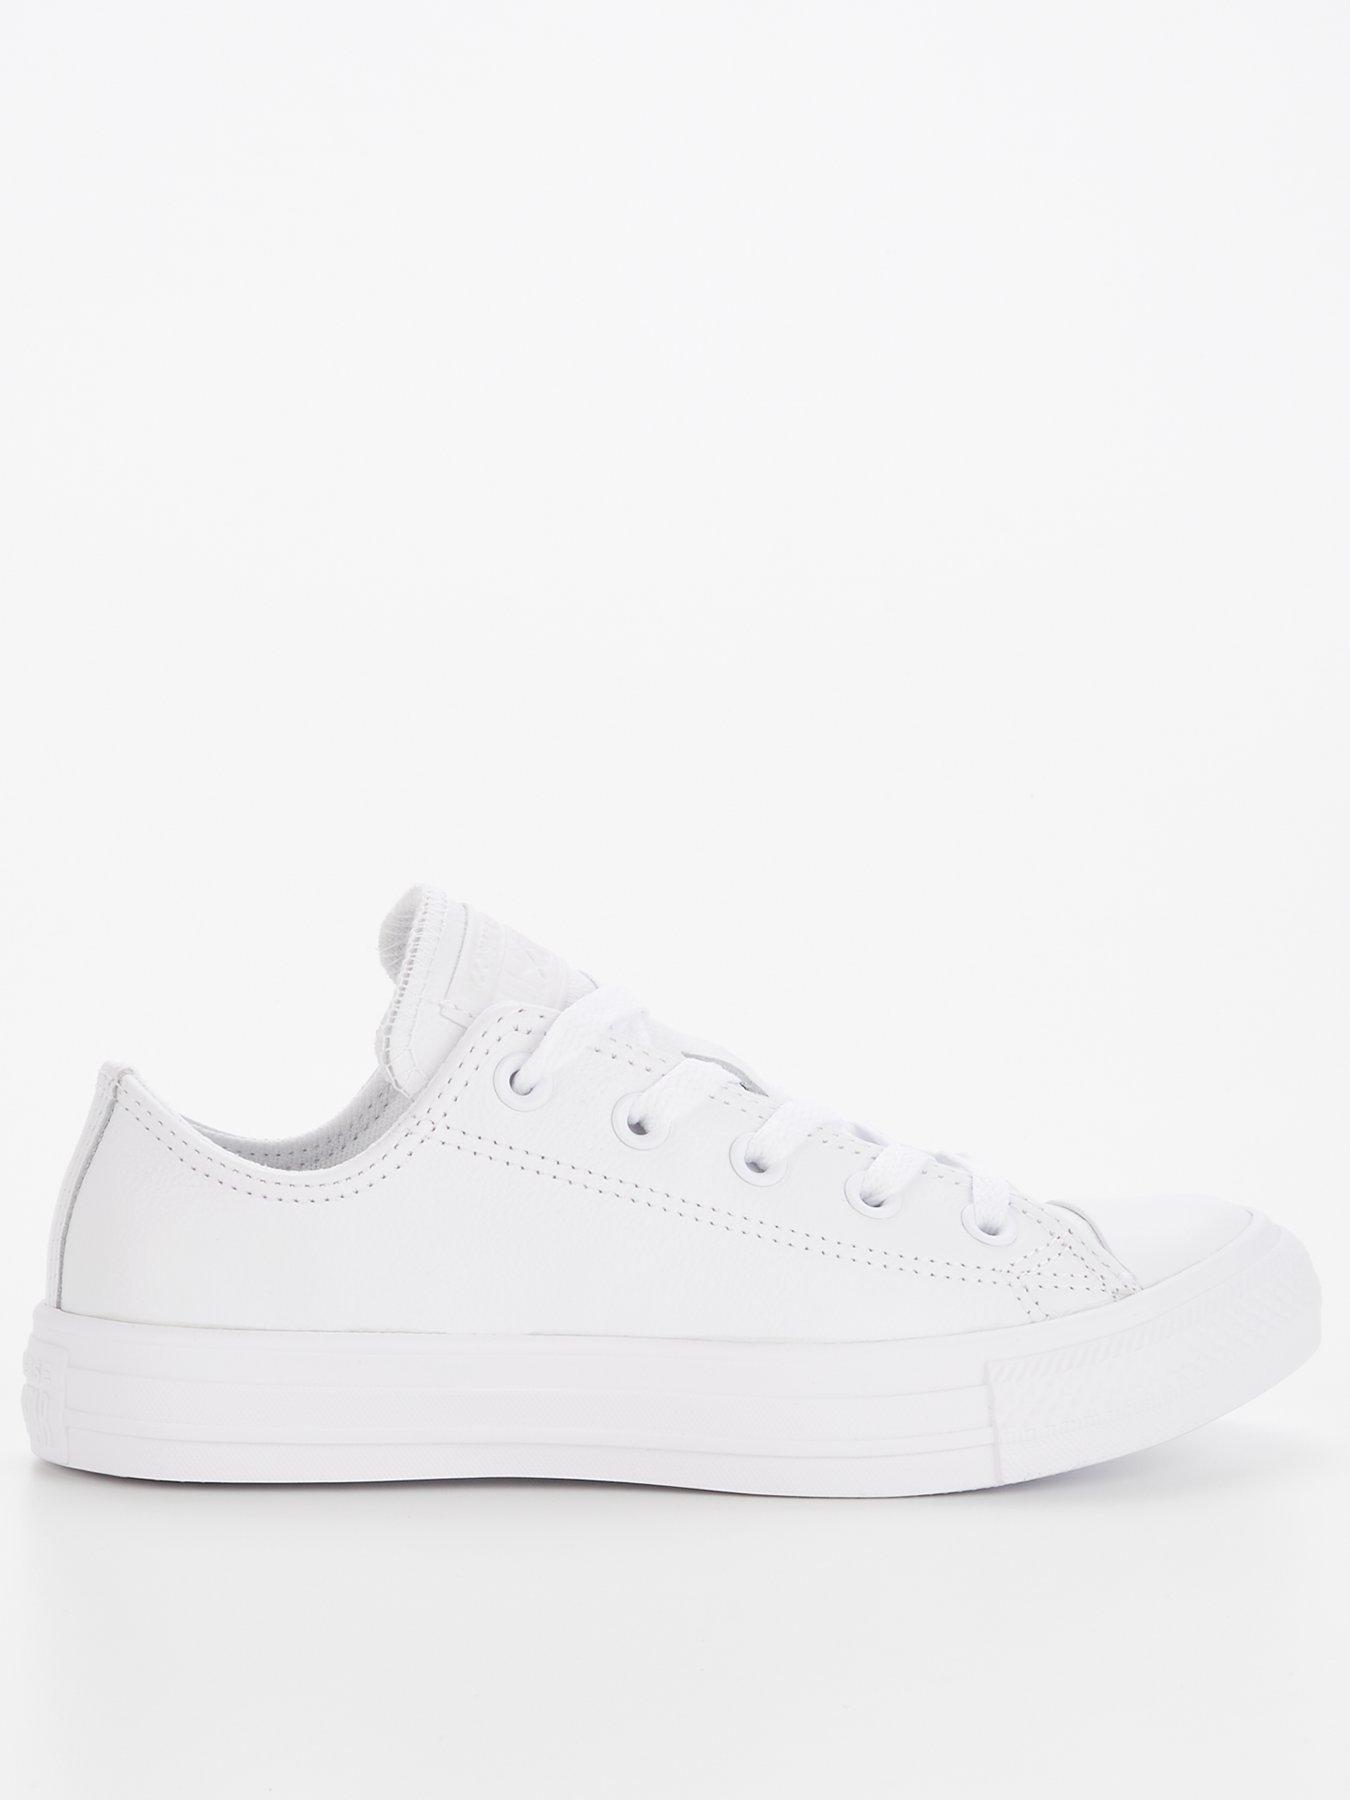 Converse Chuck Taylor Star Leather Ox White/White Very